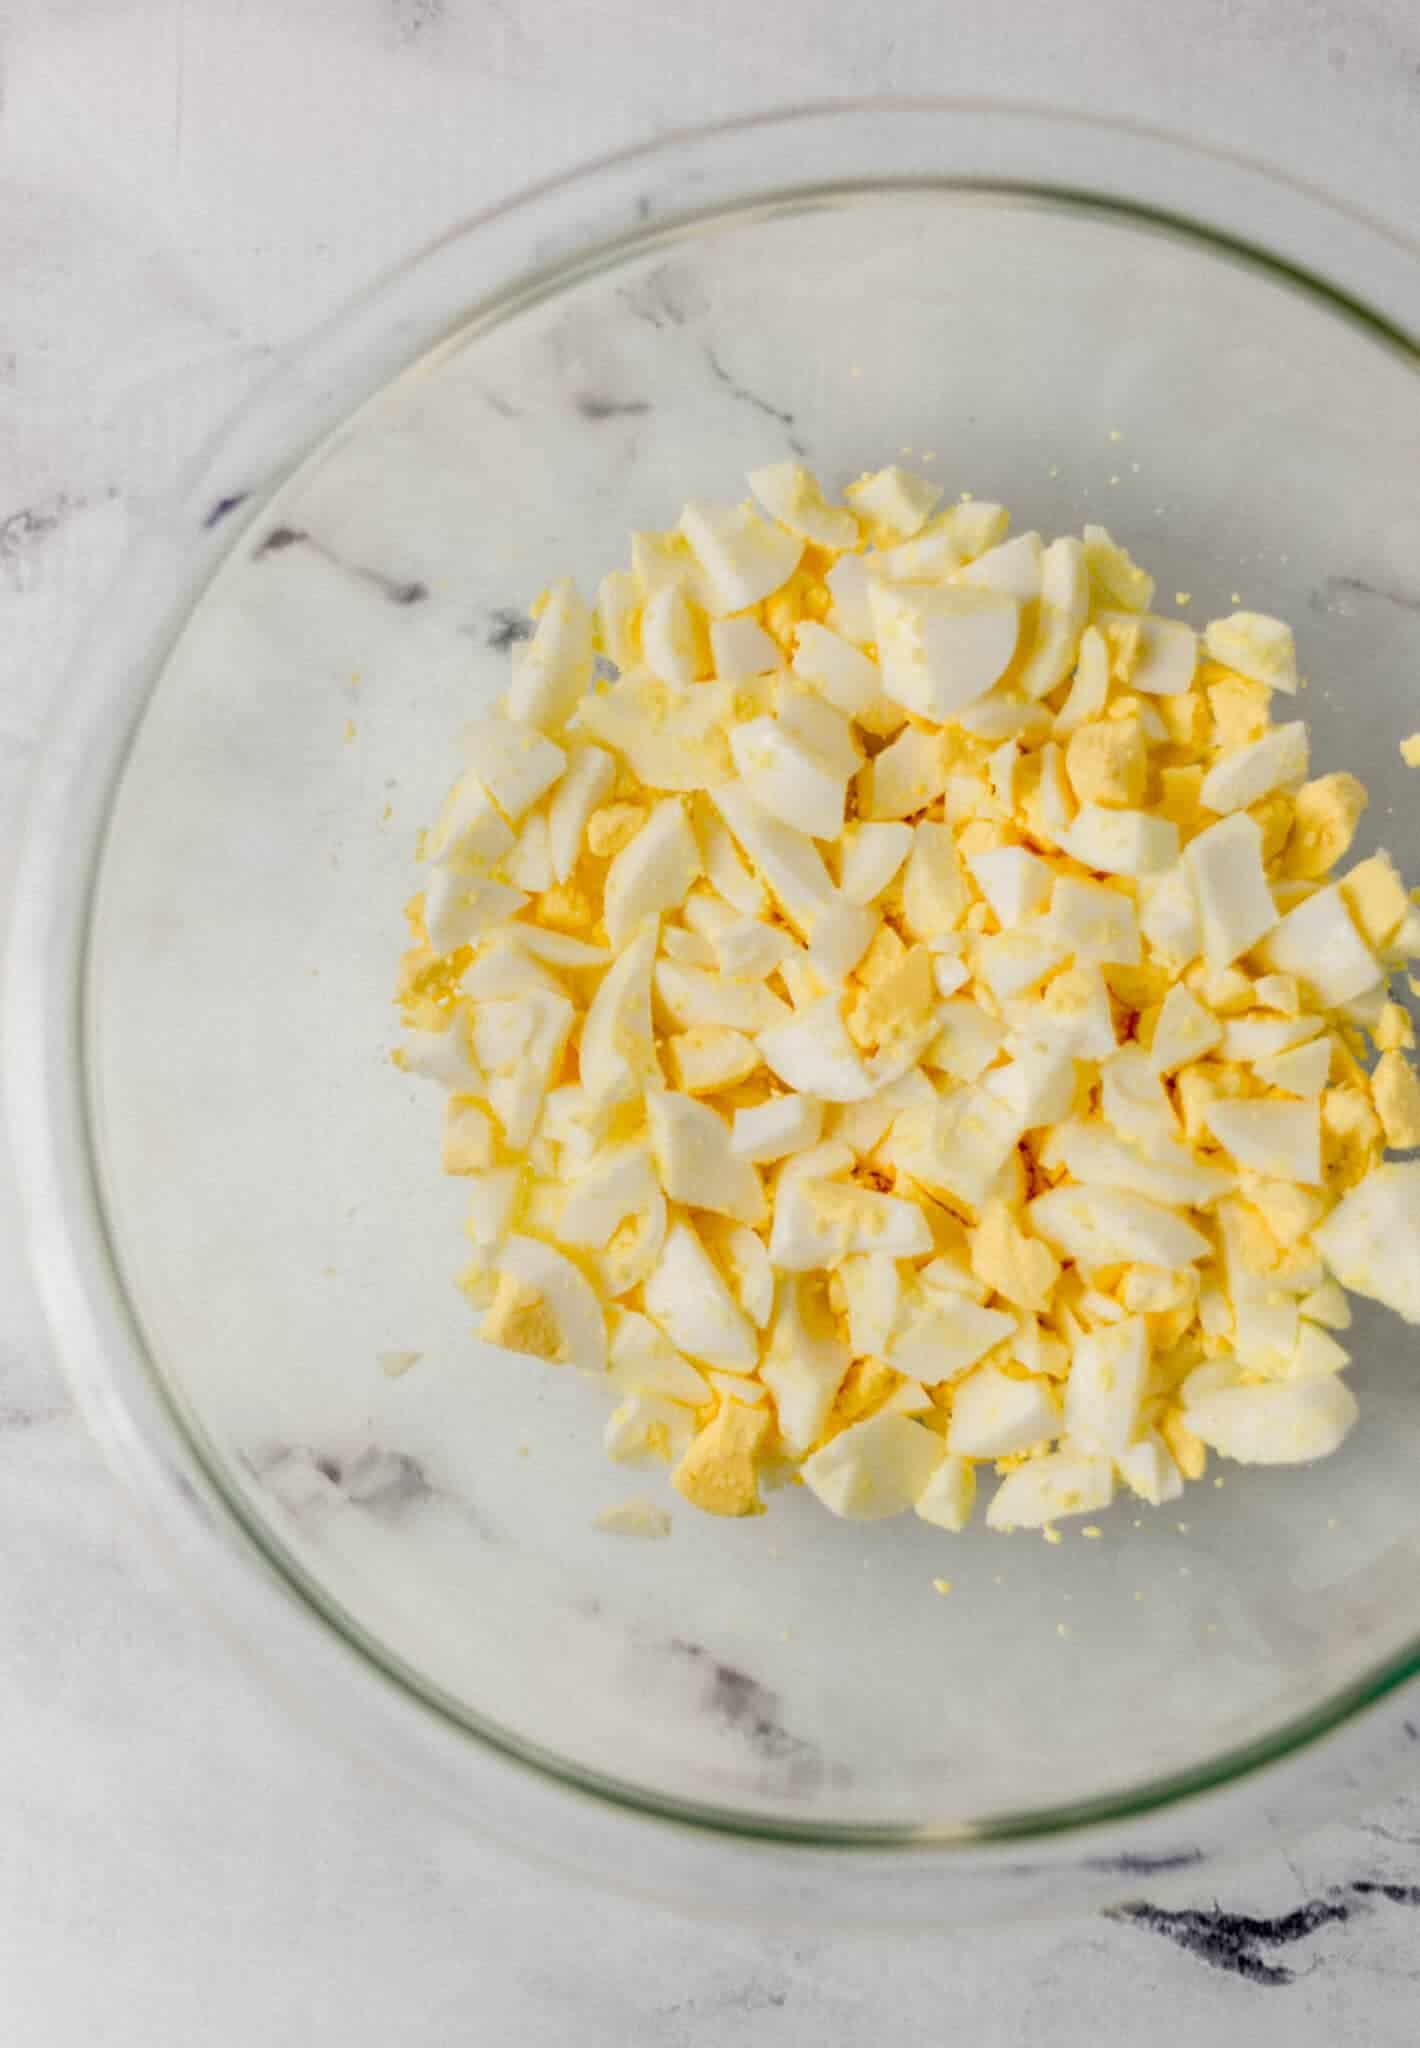 chopped up hard boiled eggs in glass bowl 